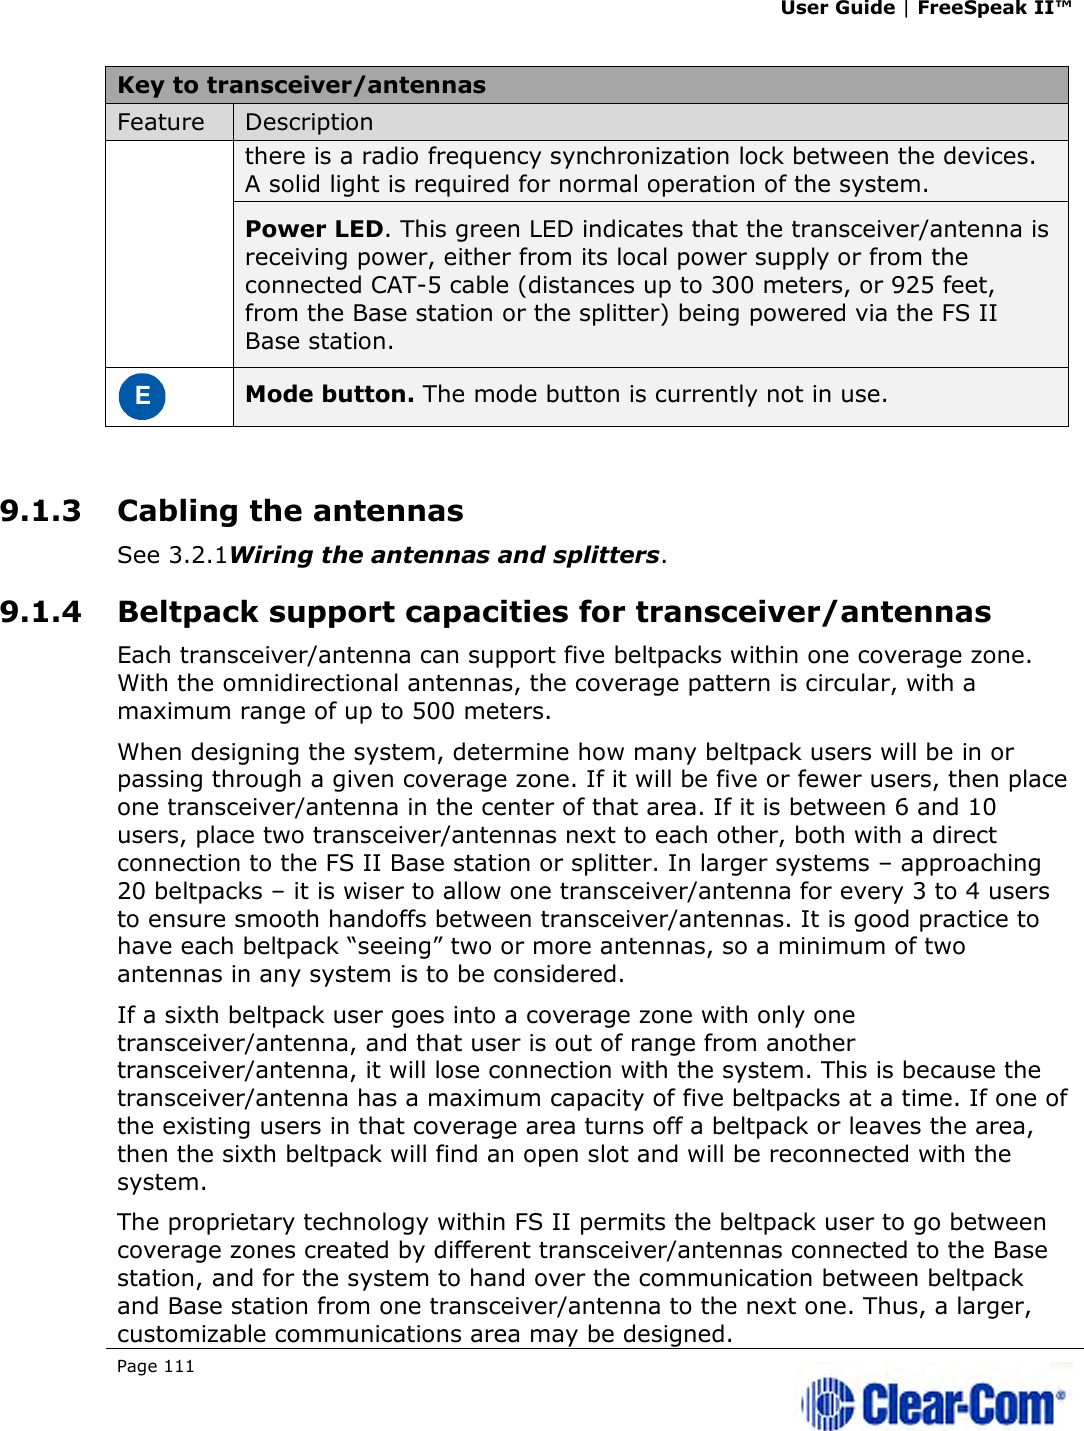 User Guide | FreeSpeak II™  Page 111   Key to transceiver/antennas Feature  Description there is a radio frequency synchronization lock between the devices. A solid light is required for normal operation of the system. Power LED. This green LED indicates that the transceiver/antenna is receiving power, either from its local power supply or from the connected CAT-5 cable (distances up to 300 meters, or 925 feet, from the Base station or the splitter) being powered via the FS II Base station. E Mode button. The mode button is currently not in use.  9.1.3 Cabling the antennas See 3.2.1Wiring the antennas and splitters.  9.1.4 Beltpack support capacities for transceiver/antennas Each transceiver/antenna can support five beltpacks within one coverage zone. With the omnidirectional antennas, the coverage pattern is circular, with a maximum range of up to 500 meters.  When designing the system, determine how many beltpack users will be in or passing through a given coverage zone. If it will be five or fewer users, then place one transceiver/antenna in the center of that area. If it is between 6 and 10 users, place two transceiver/antennas next to each other, both with a direct connection to the FS II Base station or splitter. In larger systems – approaching 20 beltpacks – it is wiser to allow one transceiver/antenna for every 3 to 4 users to ensure smooth handoffs between transceiver/antennas. It is good practice to have each beltpack “seeing” two or more antennas, so a minimum of two antennas in any system is to be considered.  If a sixth beltpack user goes into a coverage zone with only one transceiver/antenna, and that user is out of range from another transceiver/antenna, it will lose connection with the system. This is because the transceiver/antenna has a maximum capacity of five beltpacks at a time. If one of the existing users in that coverage area turns off a beltpack or leaves the area, then the sixth beltpack will find an open slot and will be reconnected with the system. The proprietary technology within FS II permits the beltpack user to go between coverage zones created by different transceiver/antennas connected to the Base station, and for the system to hand over the communication between beltpack and Base station from one transceiver/antenna to the next one. Thus, a larger, customizable communications area may be designed.  